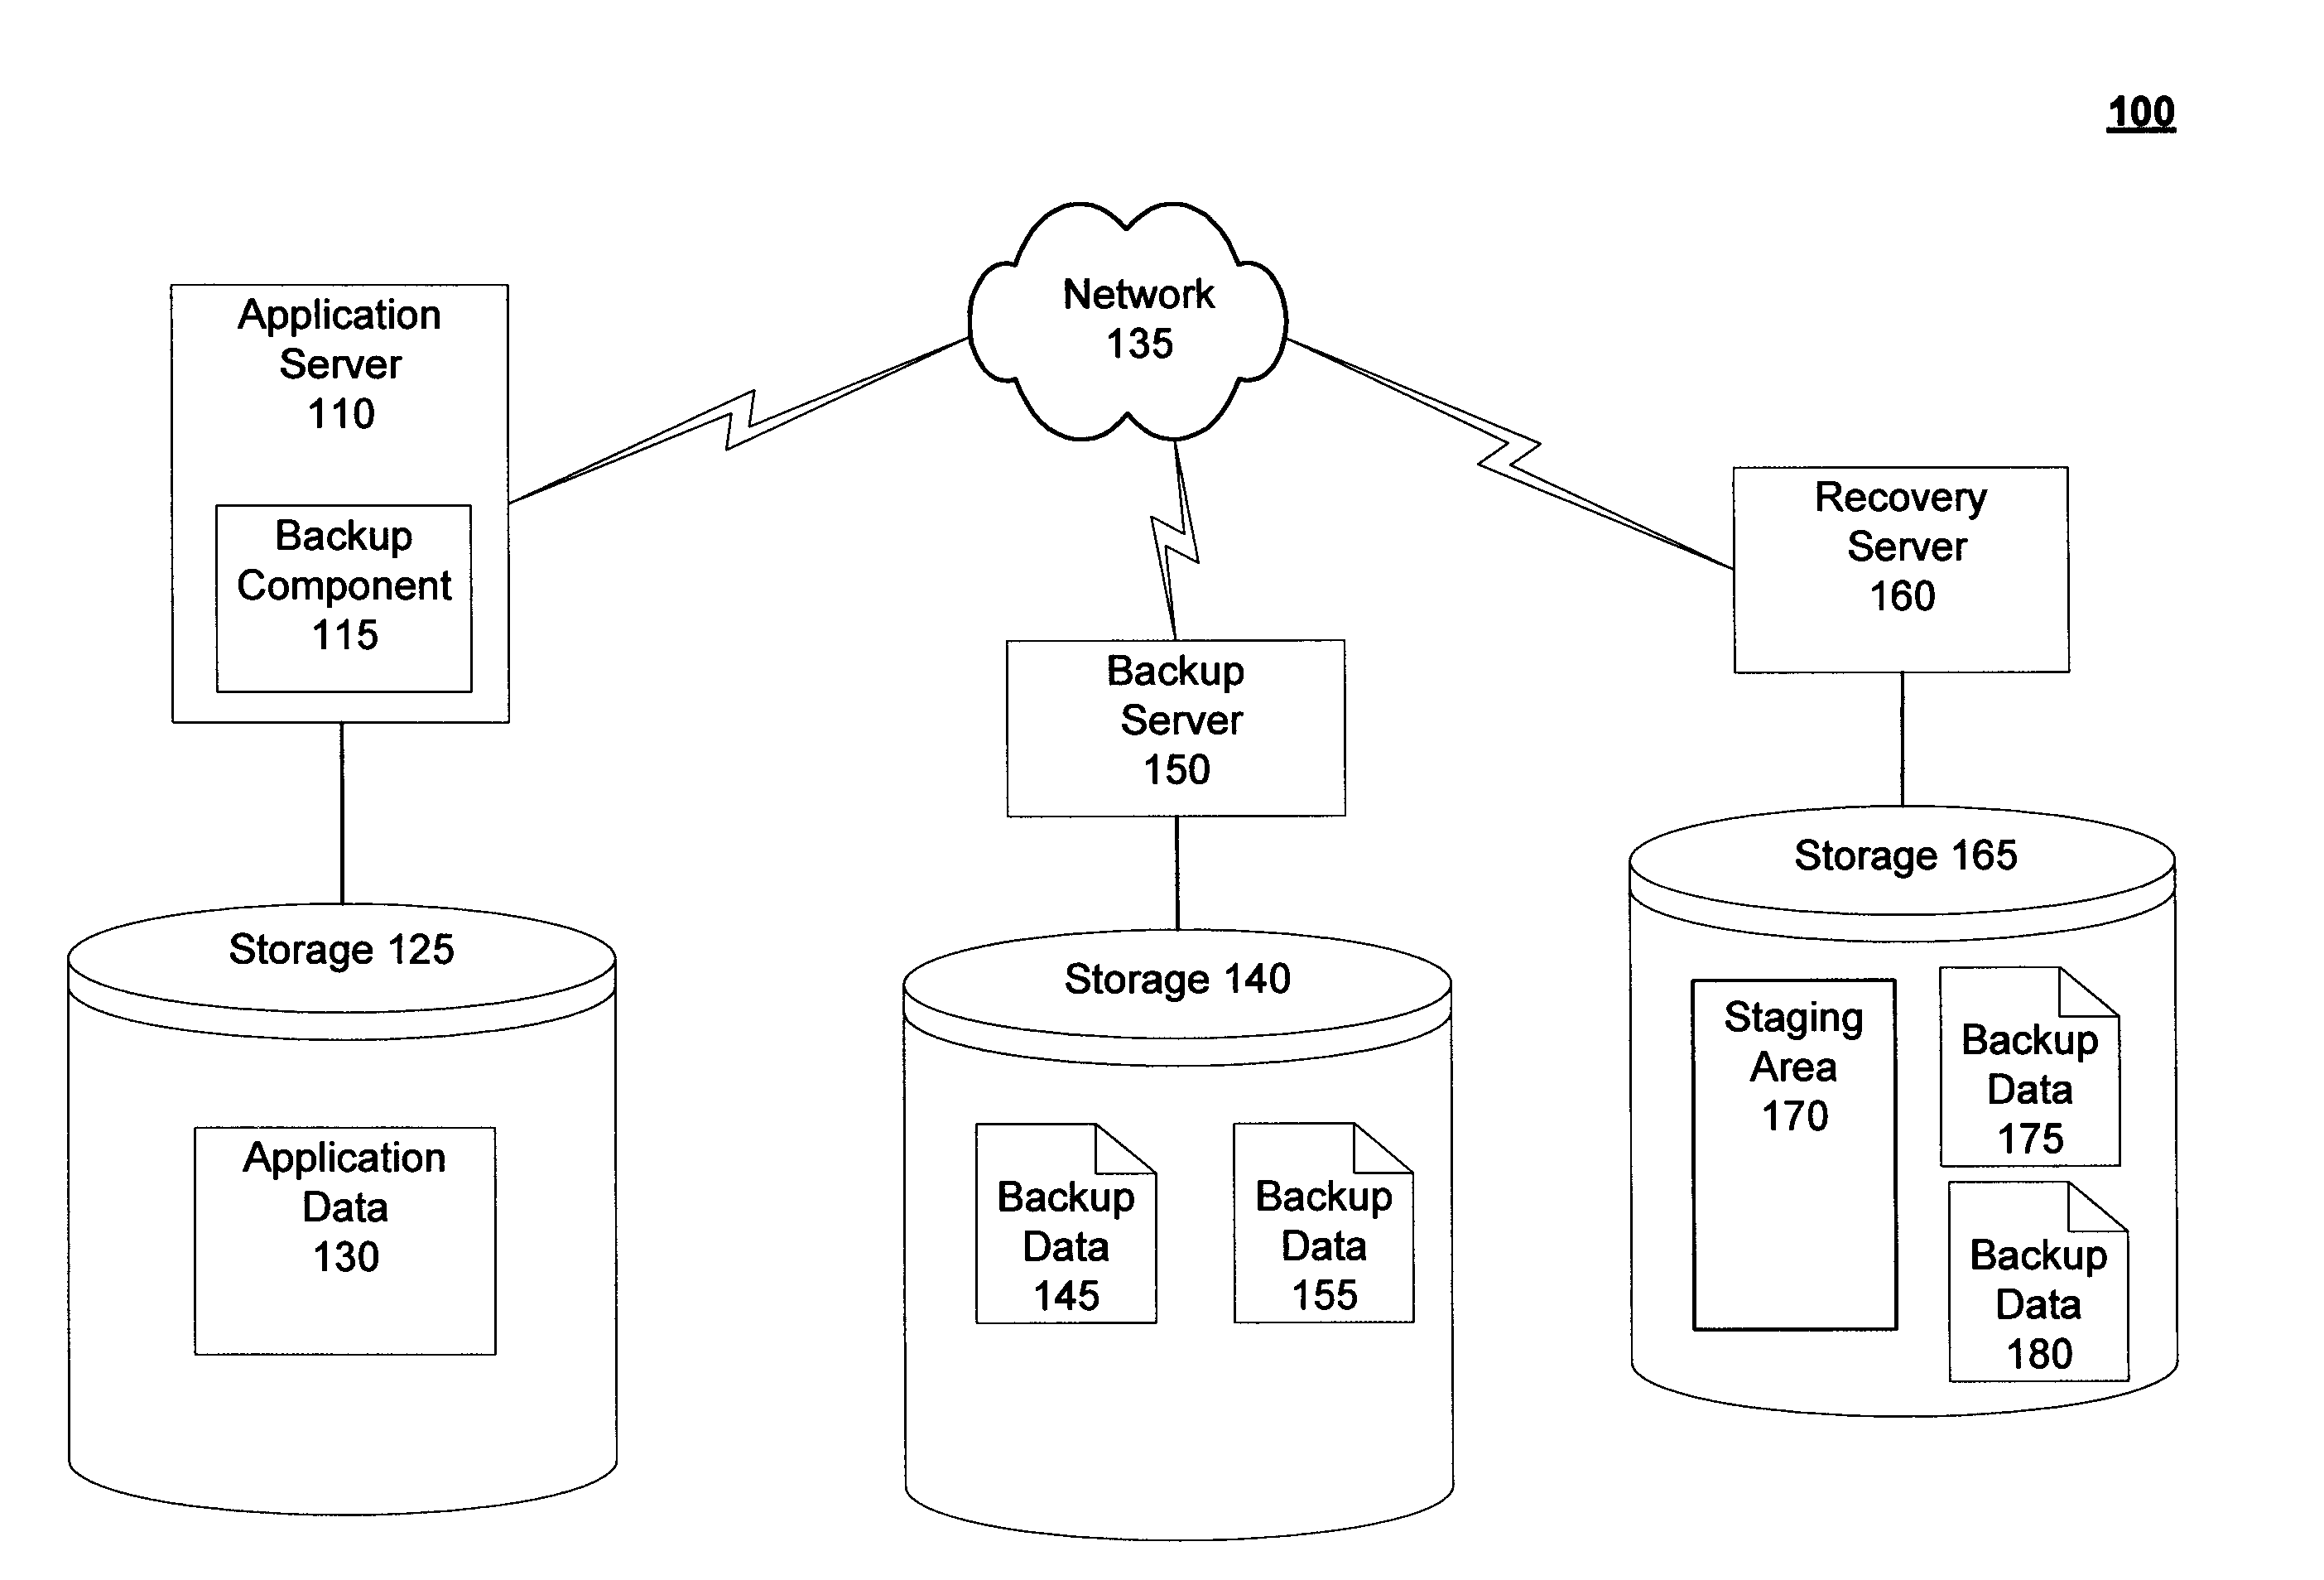 Techniques for granular recovery of data from local and remote storage